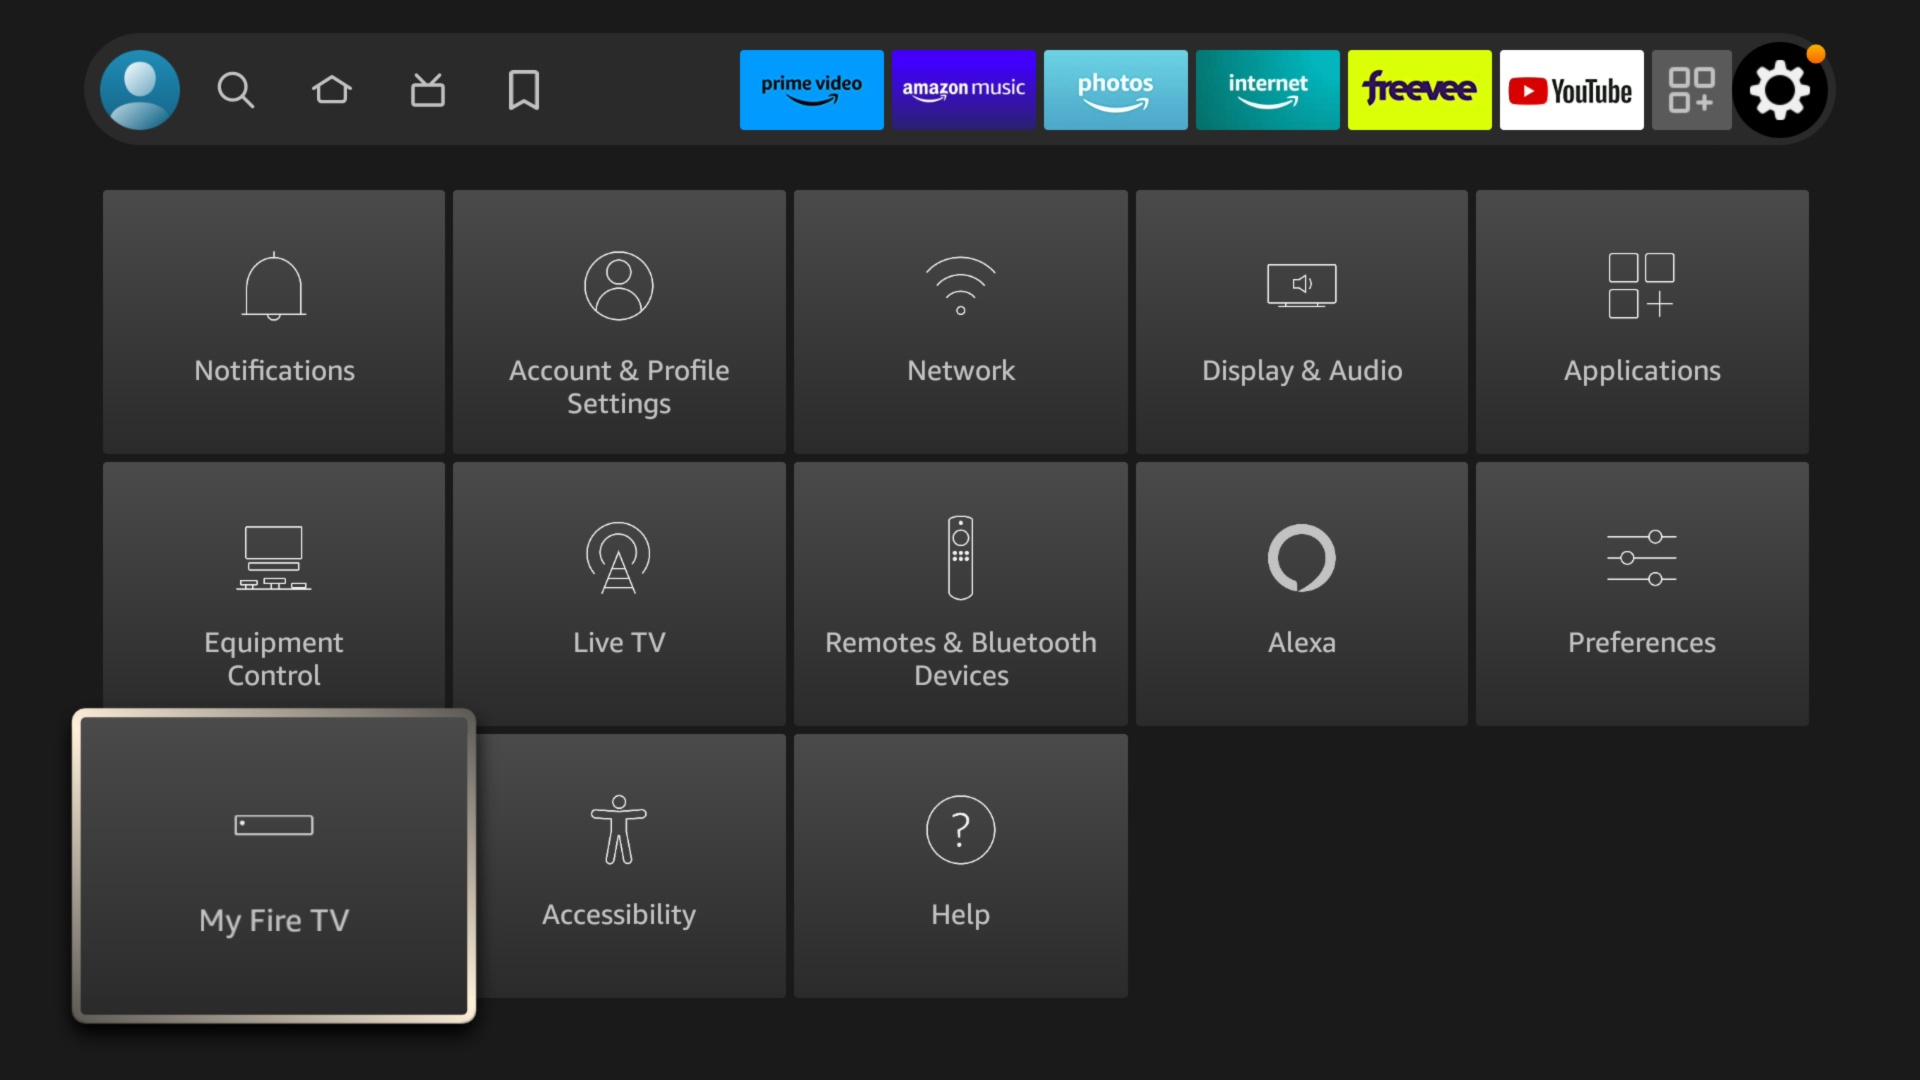 How to find your Fire TV Stick IP Address?